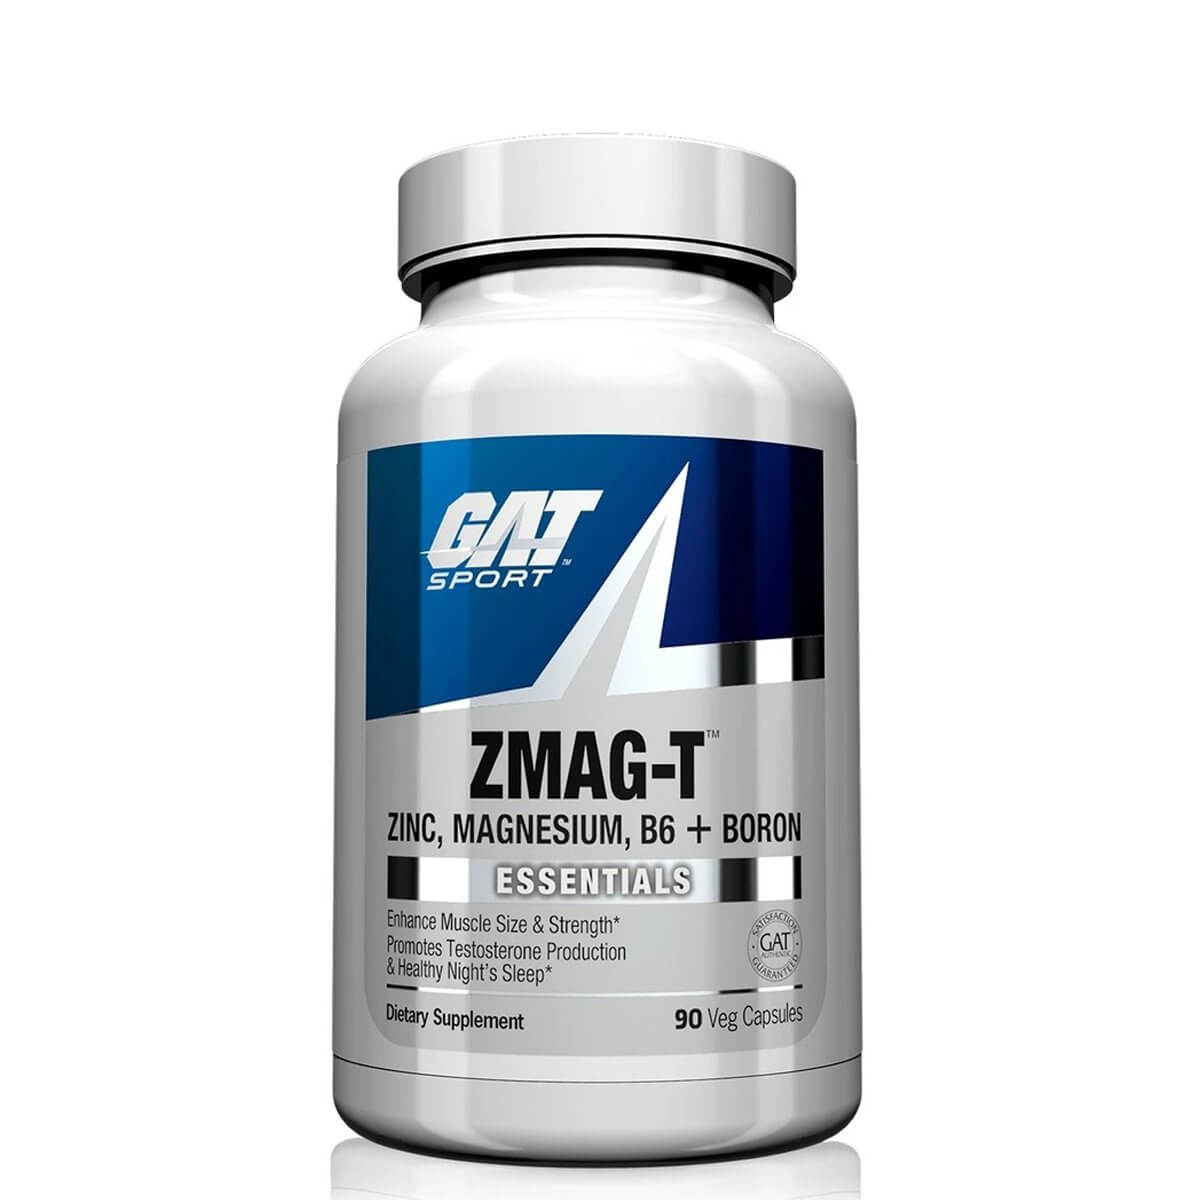 Gat ZMAG-T Overnight Recovery Support